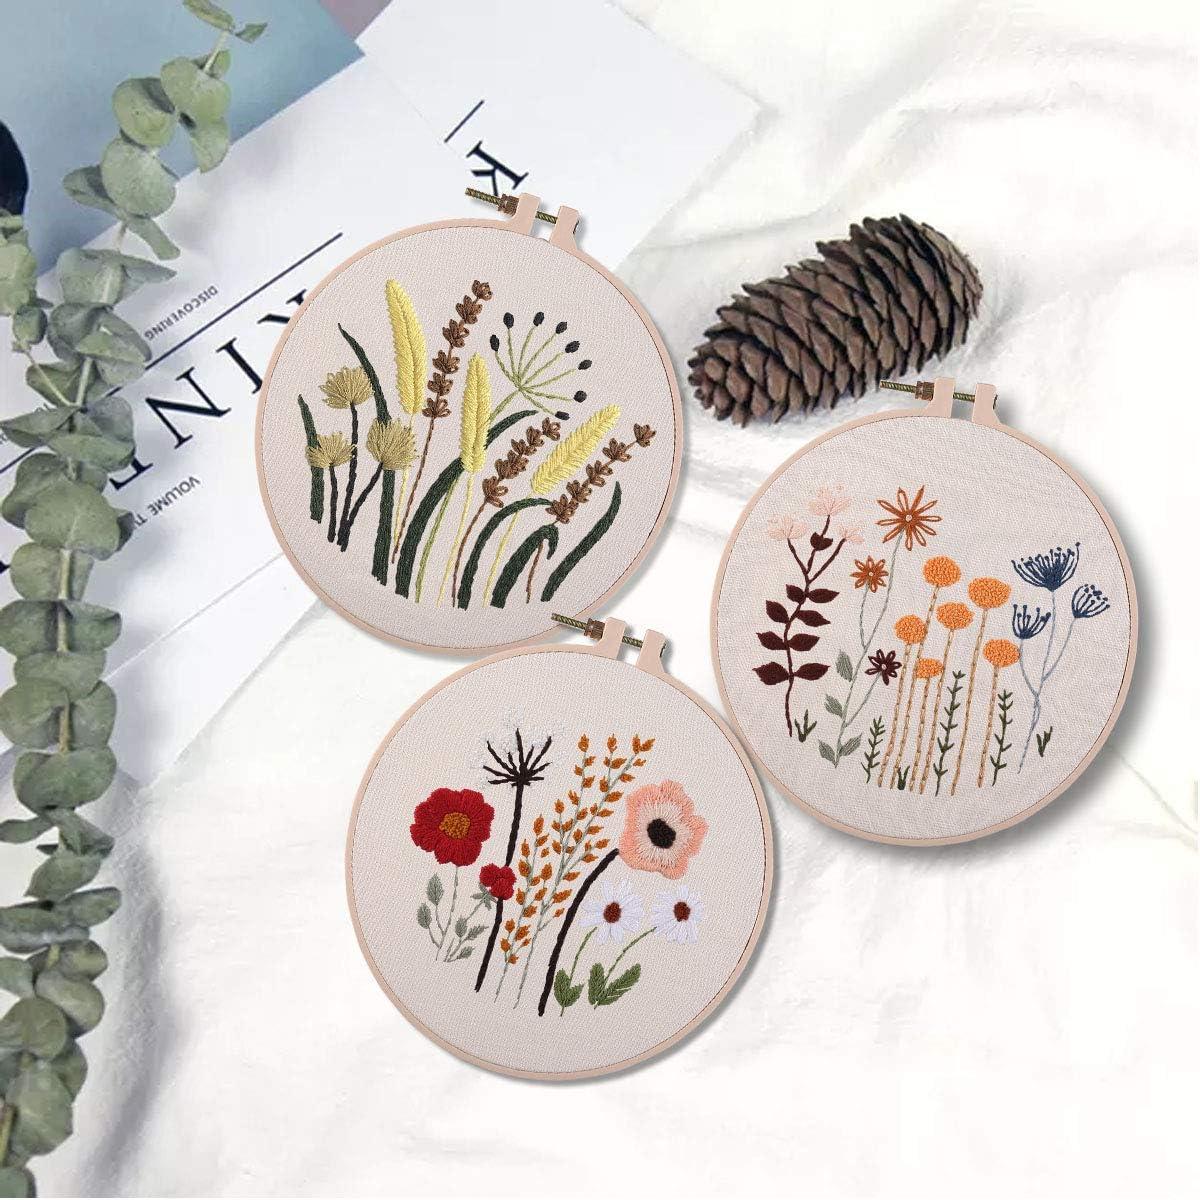 3 Sets of Beginner Embroidery Kits with 3 Patterns and 6 Needles  Needlepoint Kits for Adults Including Embroidery Floss 3 Plastic Hoops and  3 Cotton Fabric beige